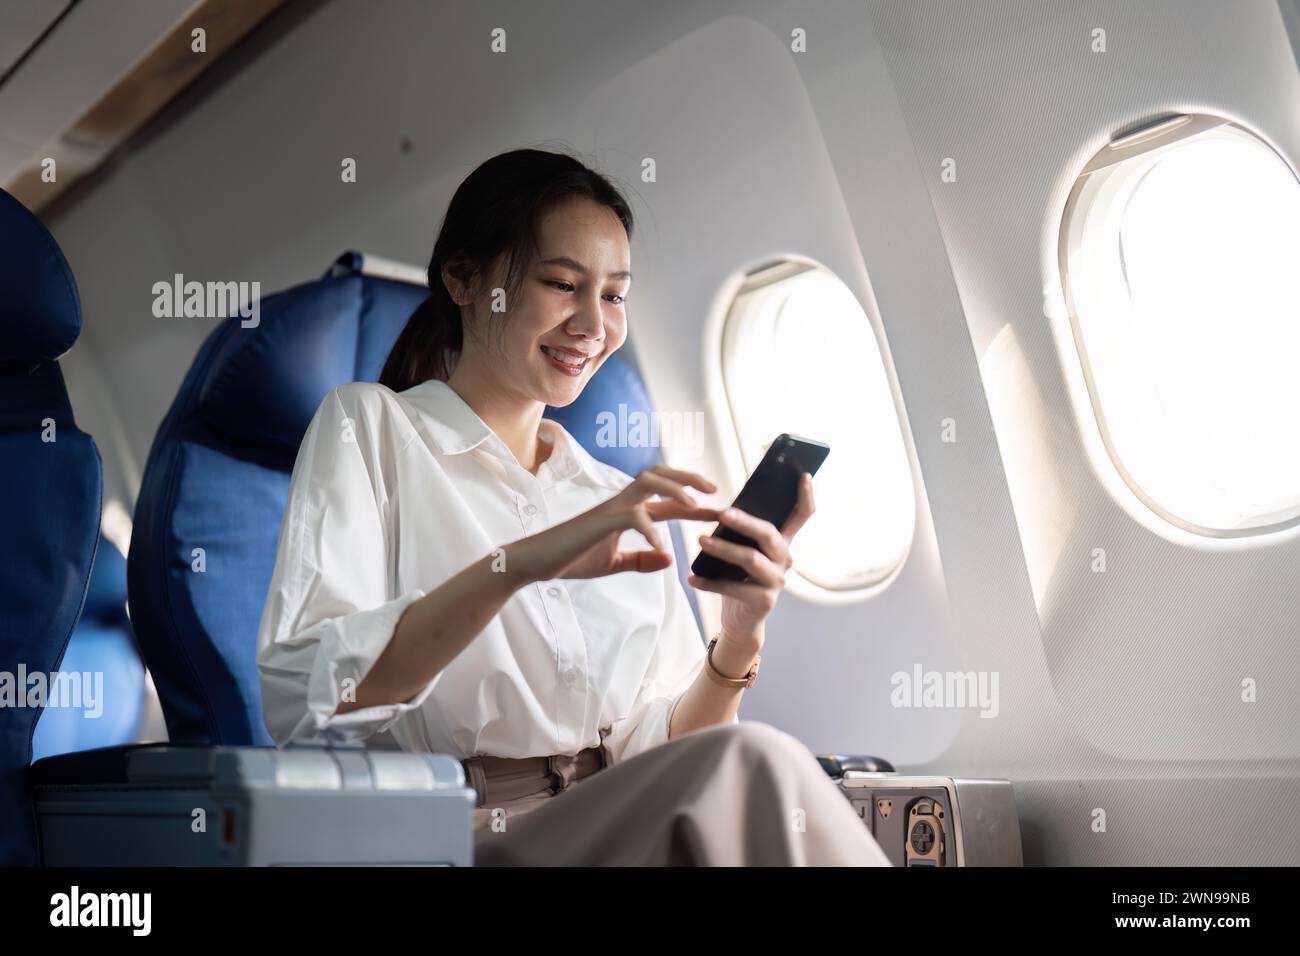 Traveling and technology. Flying at first class. Young business woman passenger using smartphone while sitting in airplane flight Stock Photo